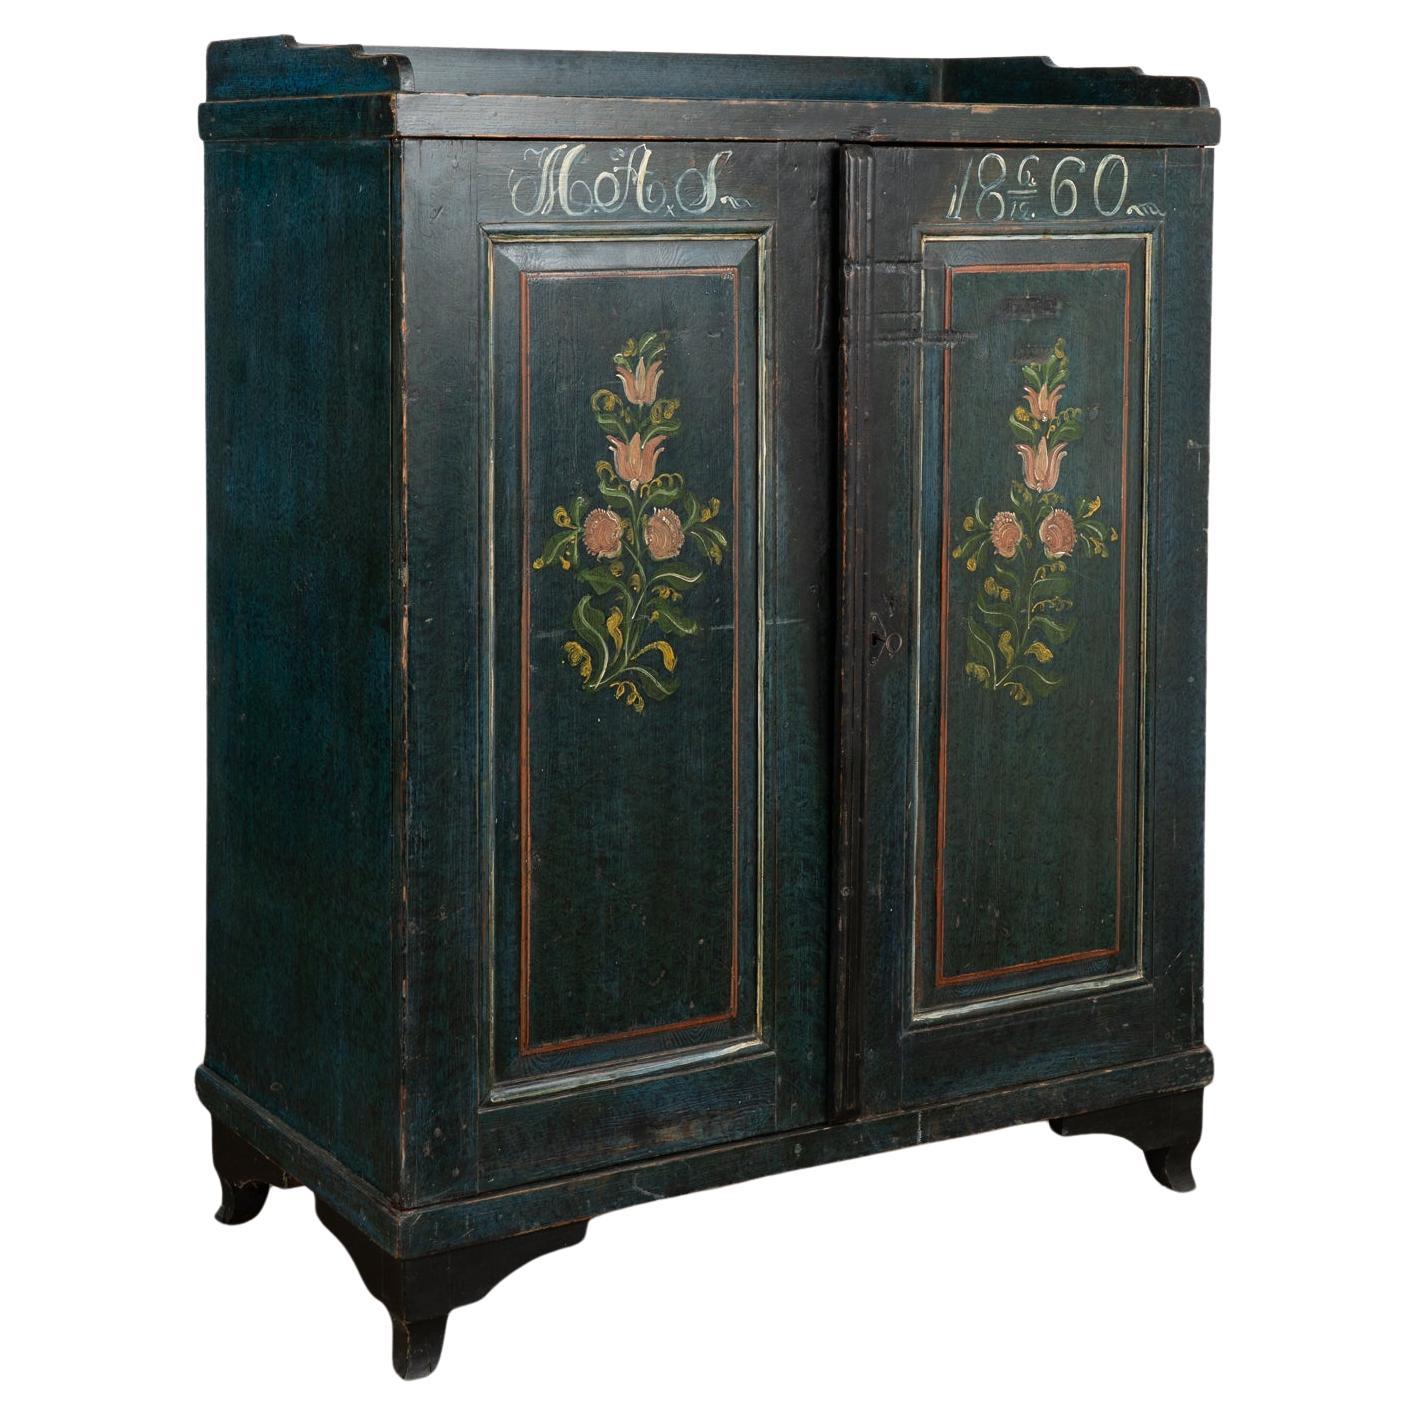 Original Dark Blue Painted Sideboard With Flowers, Sweden dated 1860 For Sale